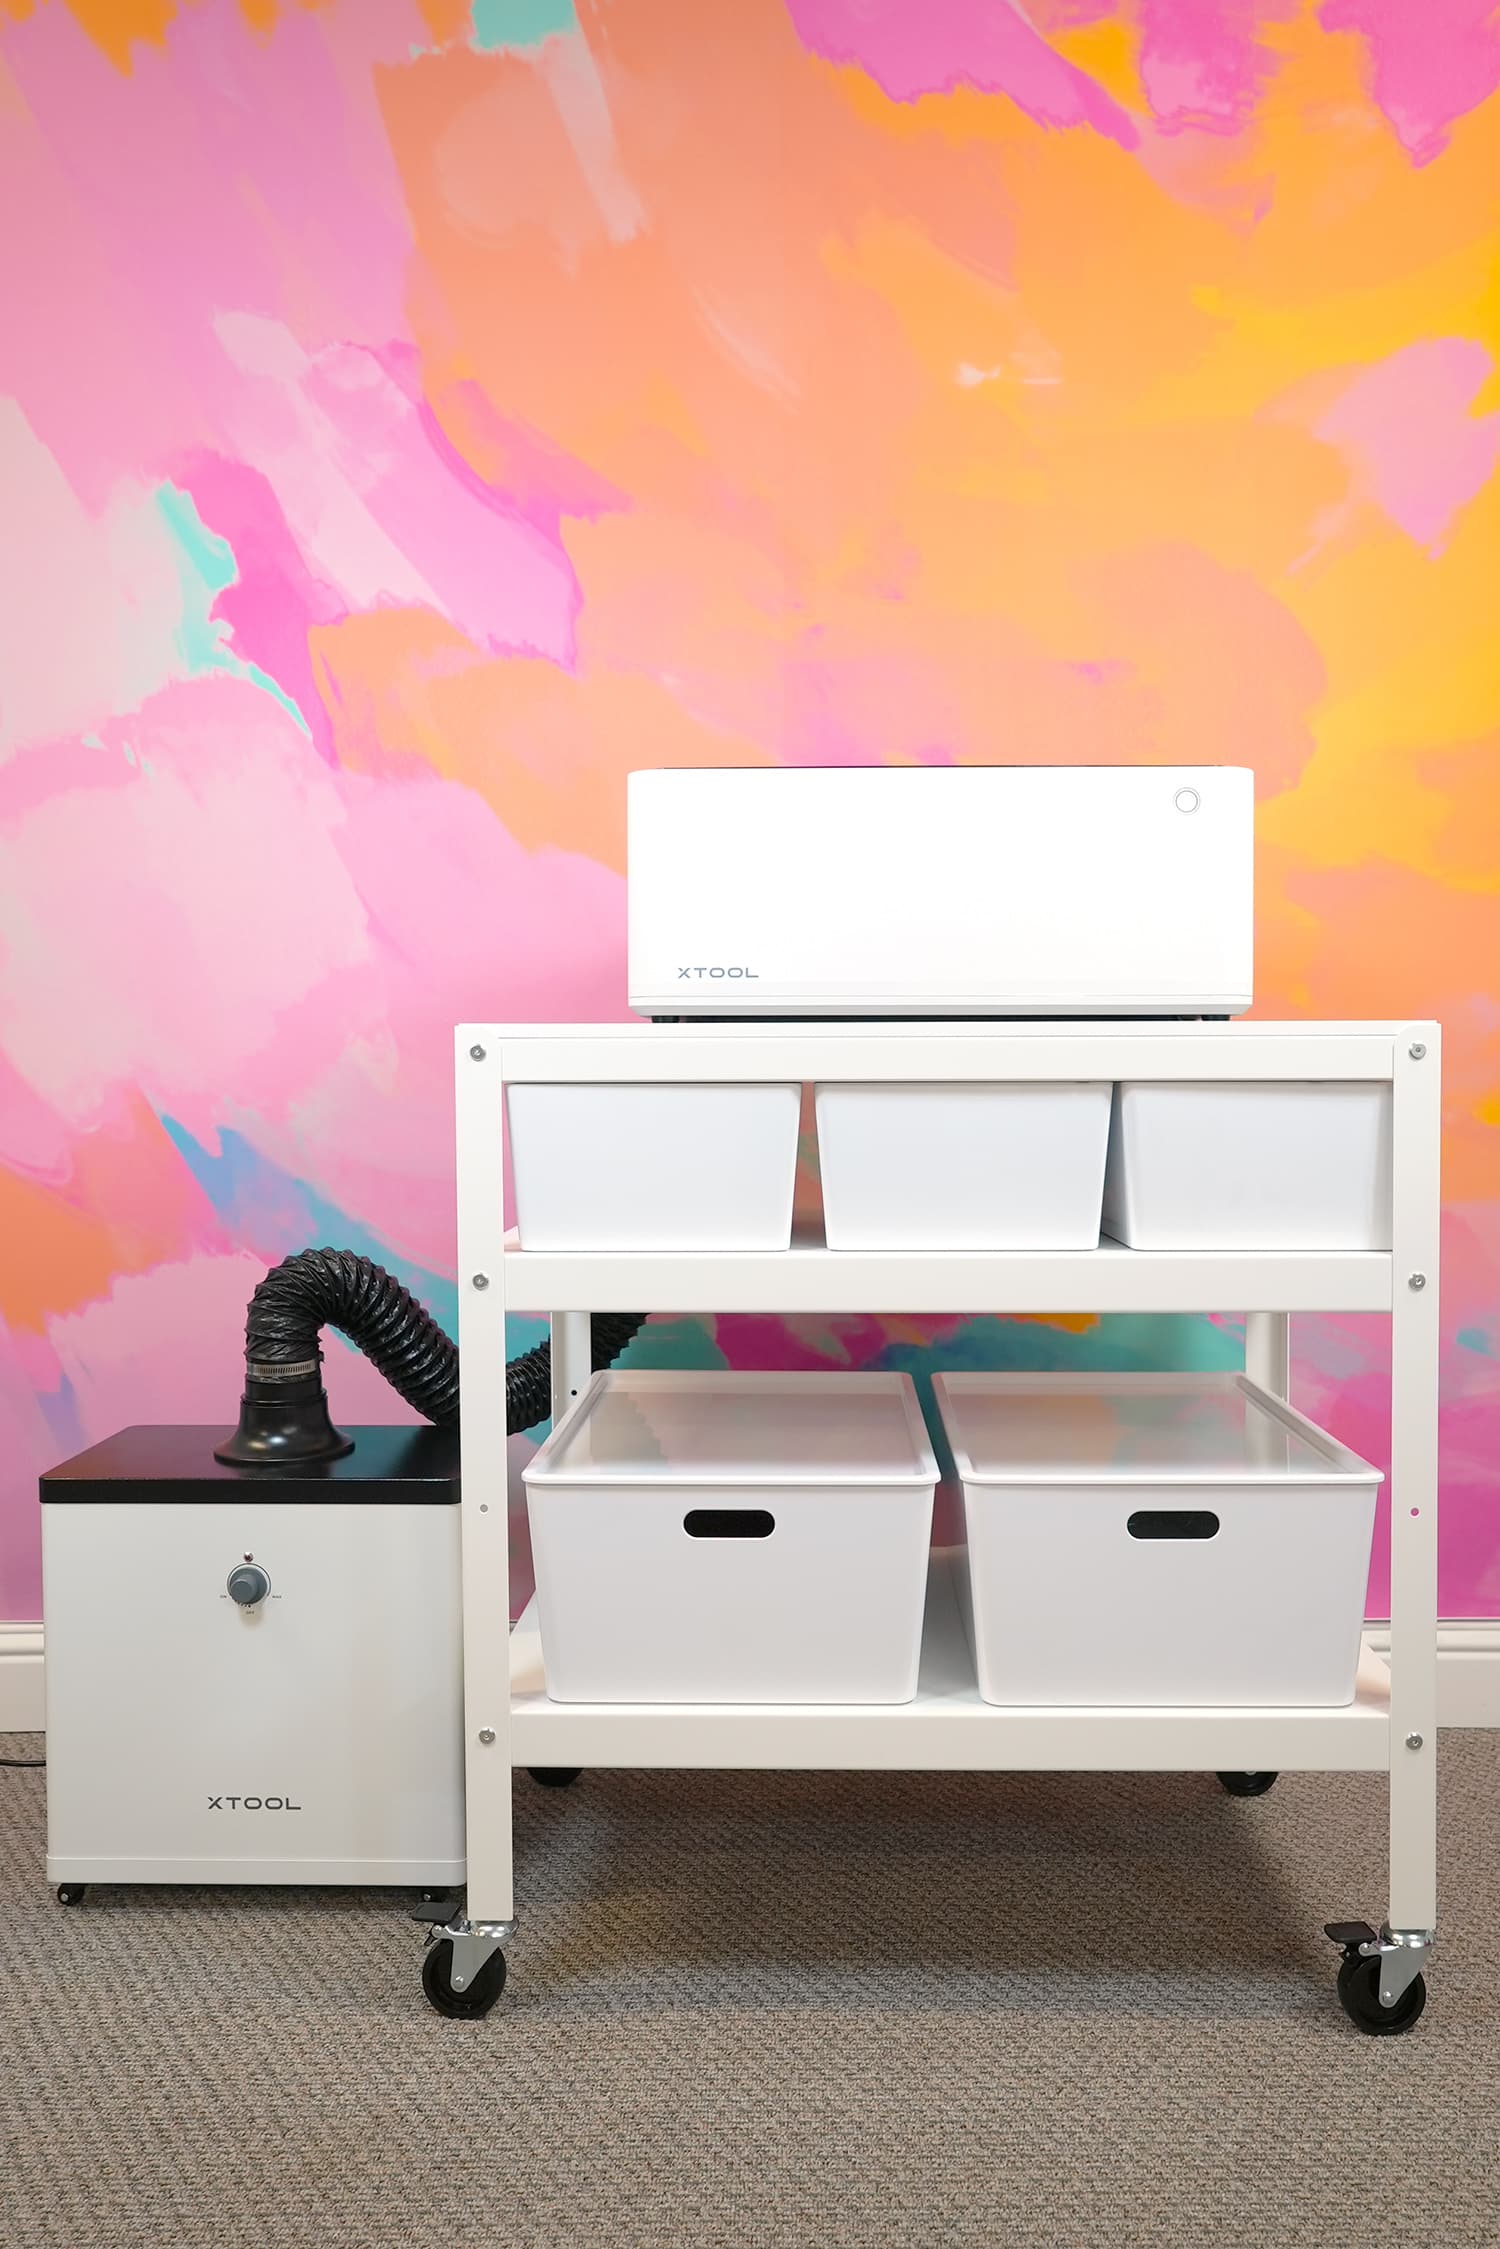 xTool M1 10w laser and smoke purifier in front of a colorful pink, orange, and yellow wall